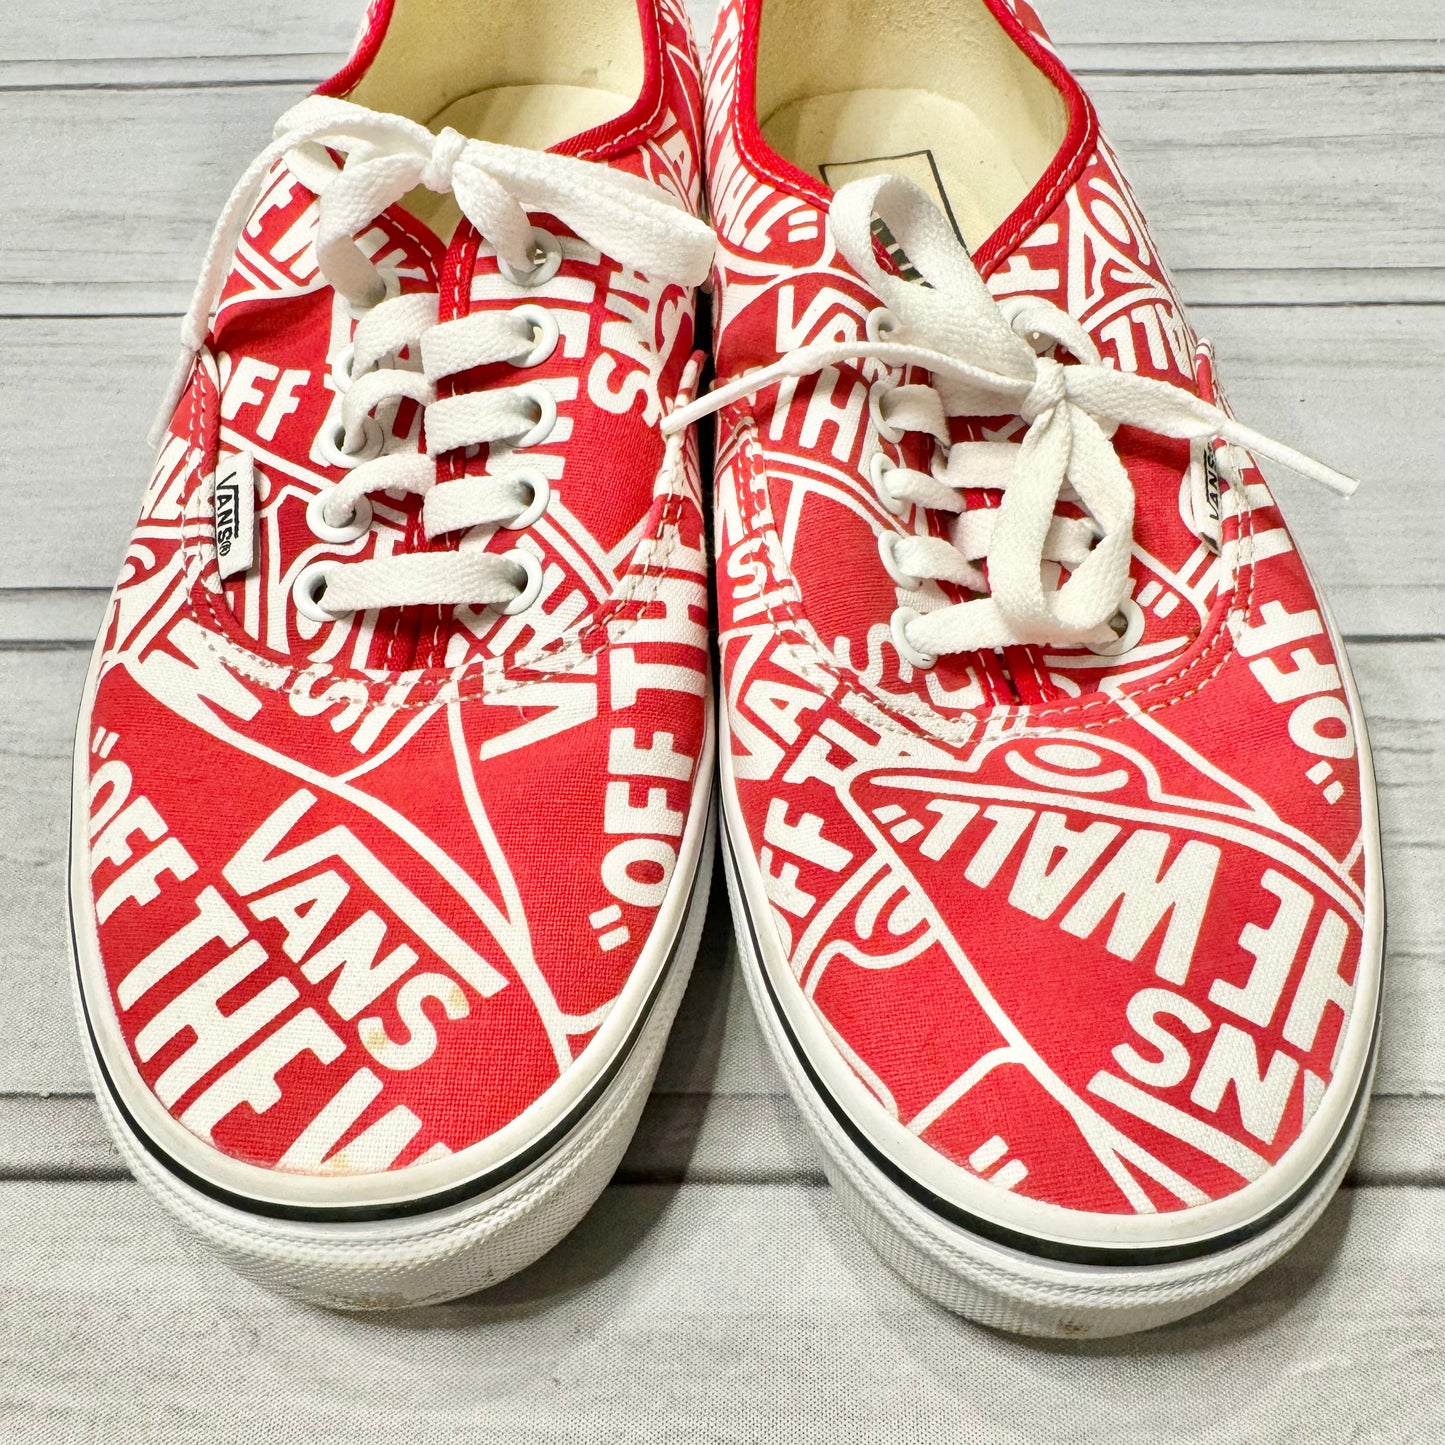 Shoes Sneakers By Vans  Size: 9.5